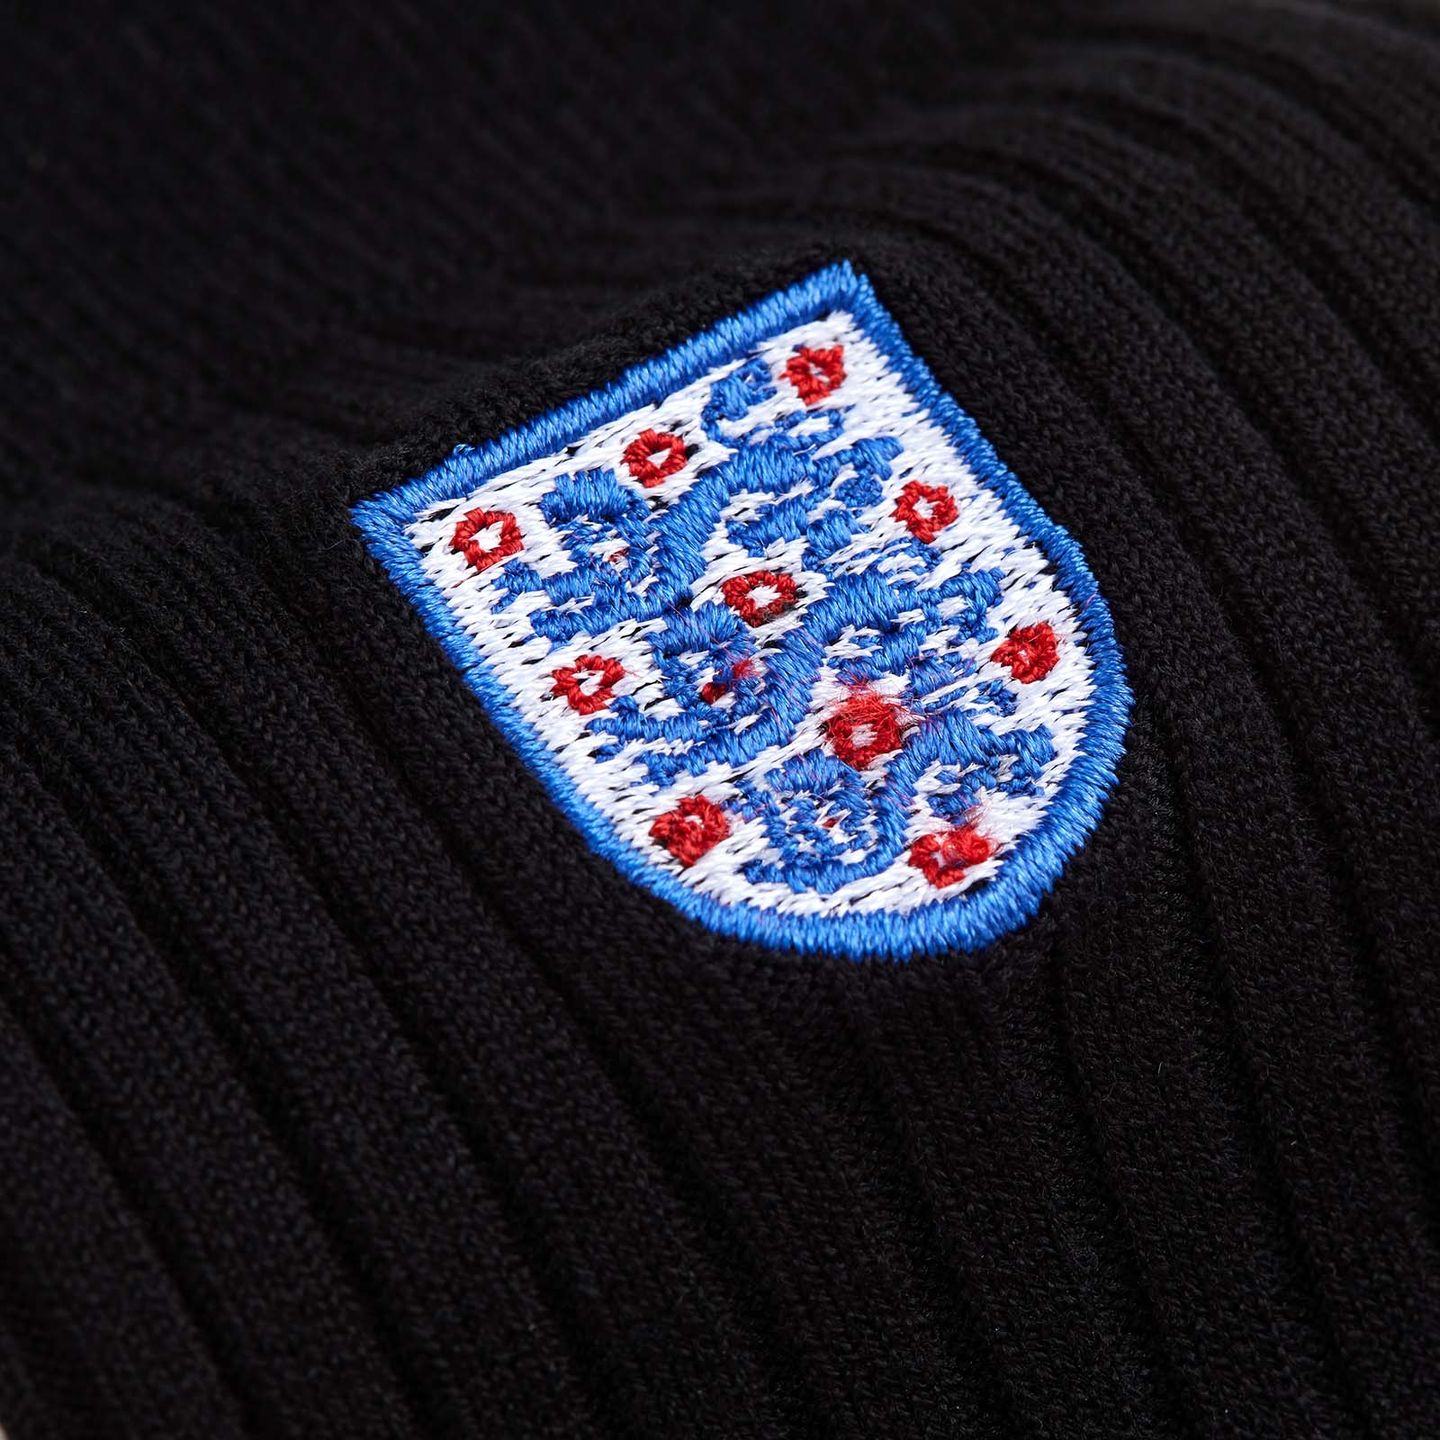 Close up of the England badge on a black pair of socks